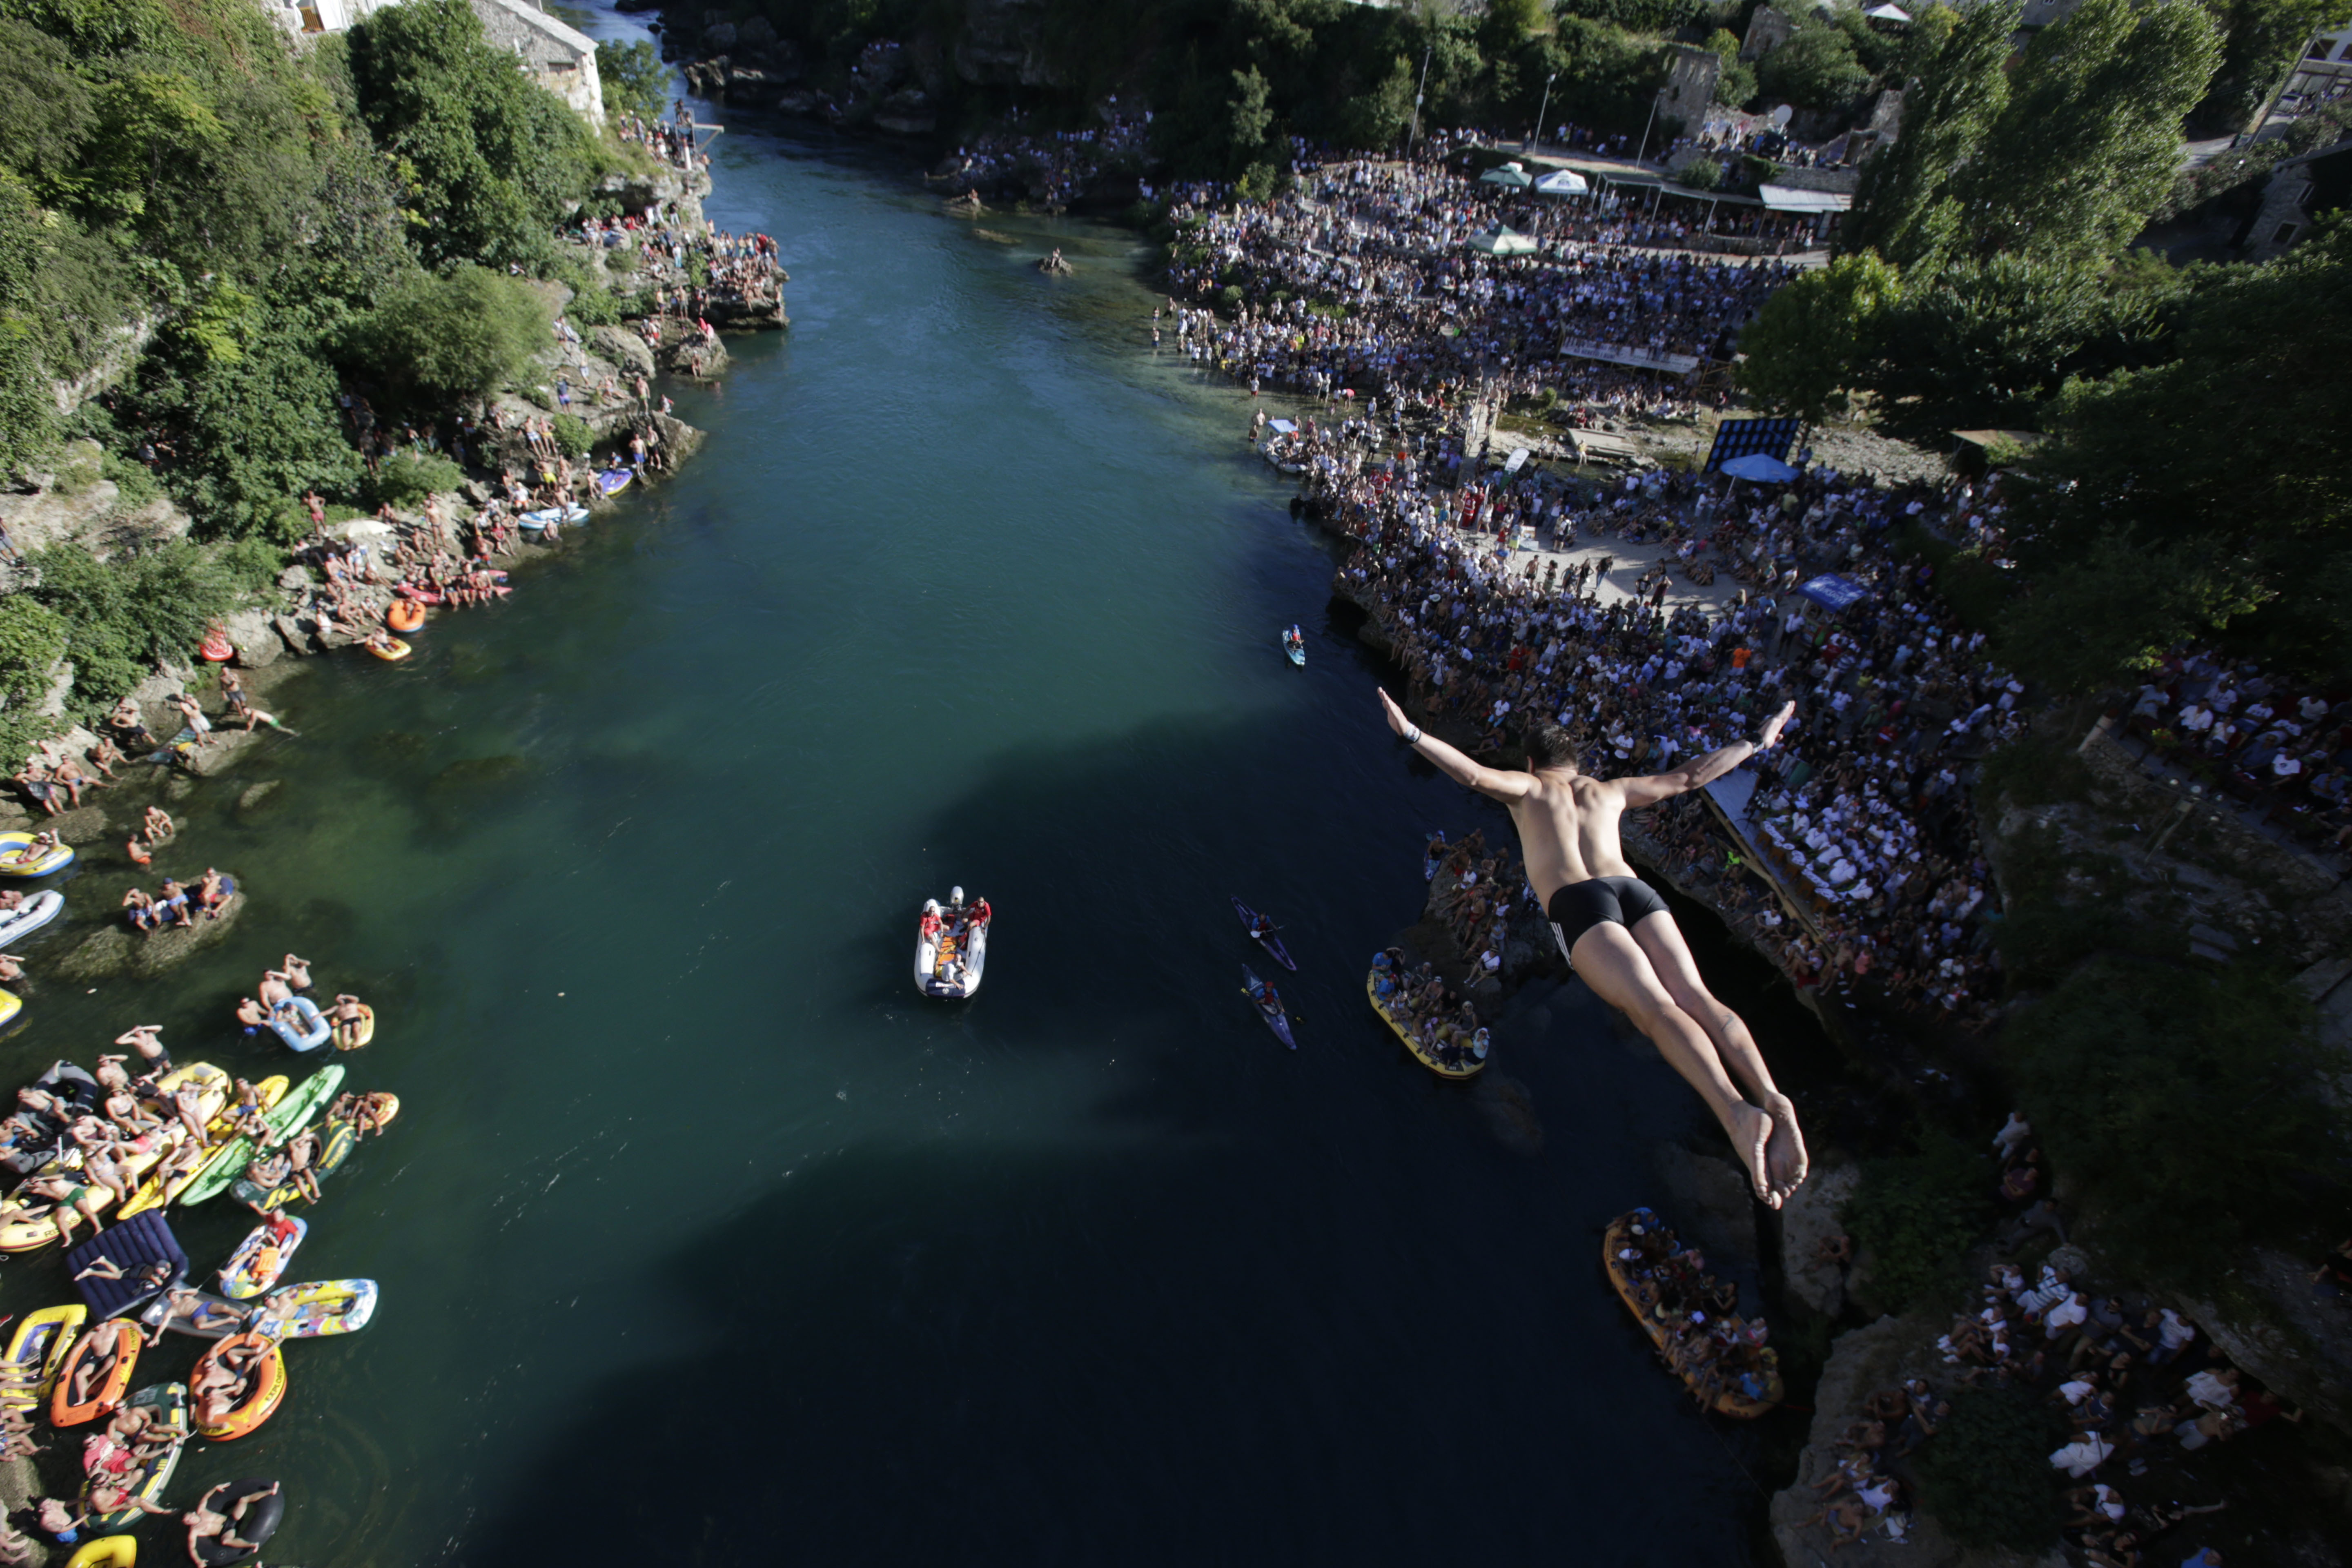 A diver drops through the air from the Mostar bridge during the 451th traditional annual high diving competition, in Mostar, 140 kms south of Bosnian capital of Sarajevo, Sunday, July 30, 2017. Total of 41 divers from Bosnia and neighbouring countries competed diving from 25 meters high Old Mostar Bridge into the Neretva river. (AP Photo/Amel Emric)